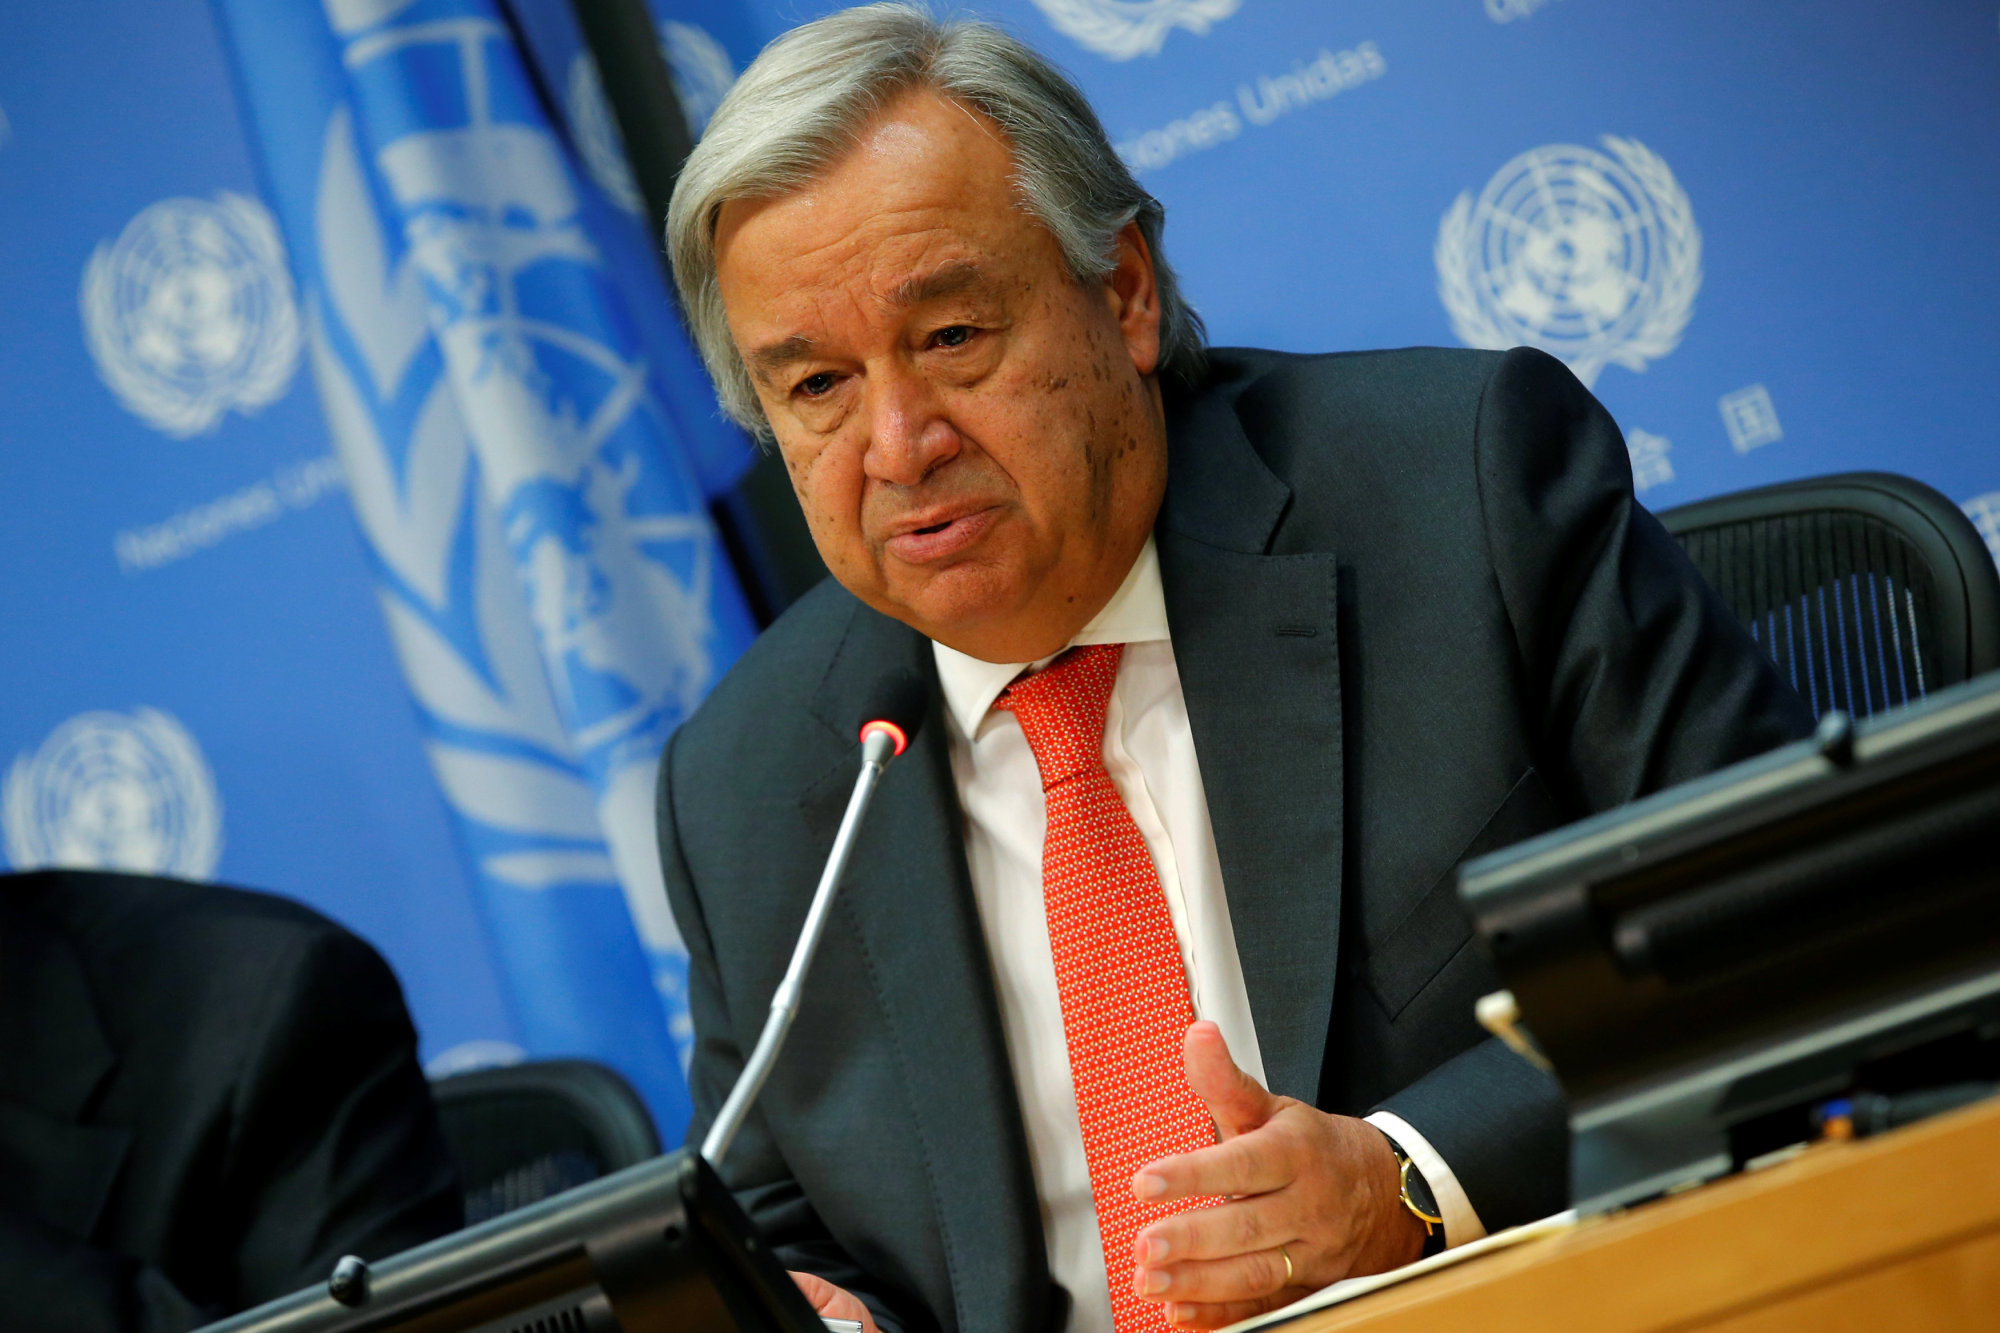 U.N. Secretary-General Antonio Guterres is planning to visit Japan by year-end to discuss a range of issues including North Korea’s nuclear program with Prime Minister Shinzo Abe. | REUTERS